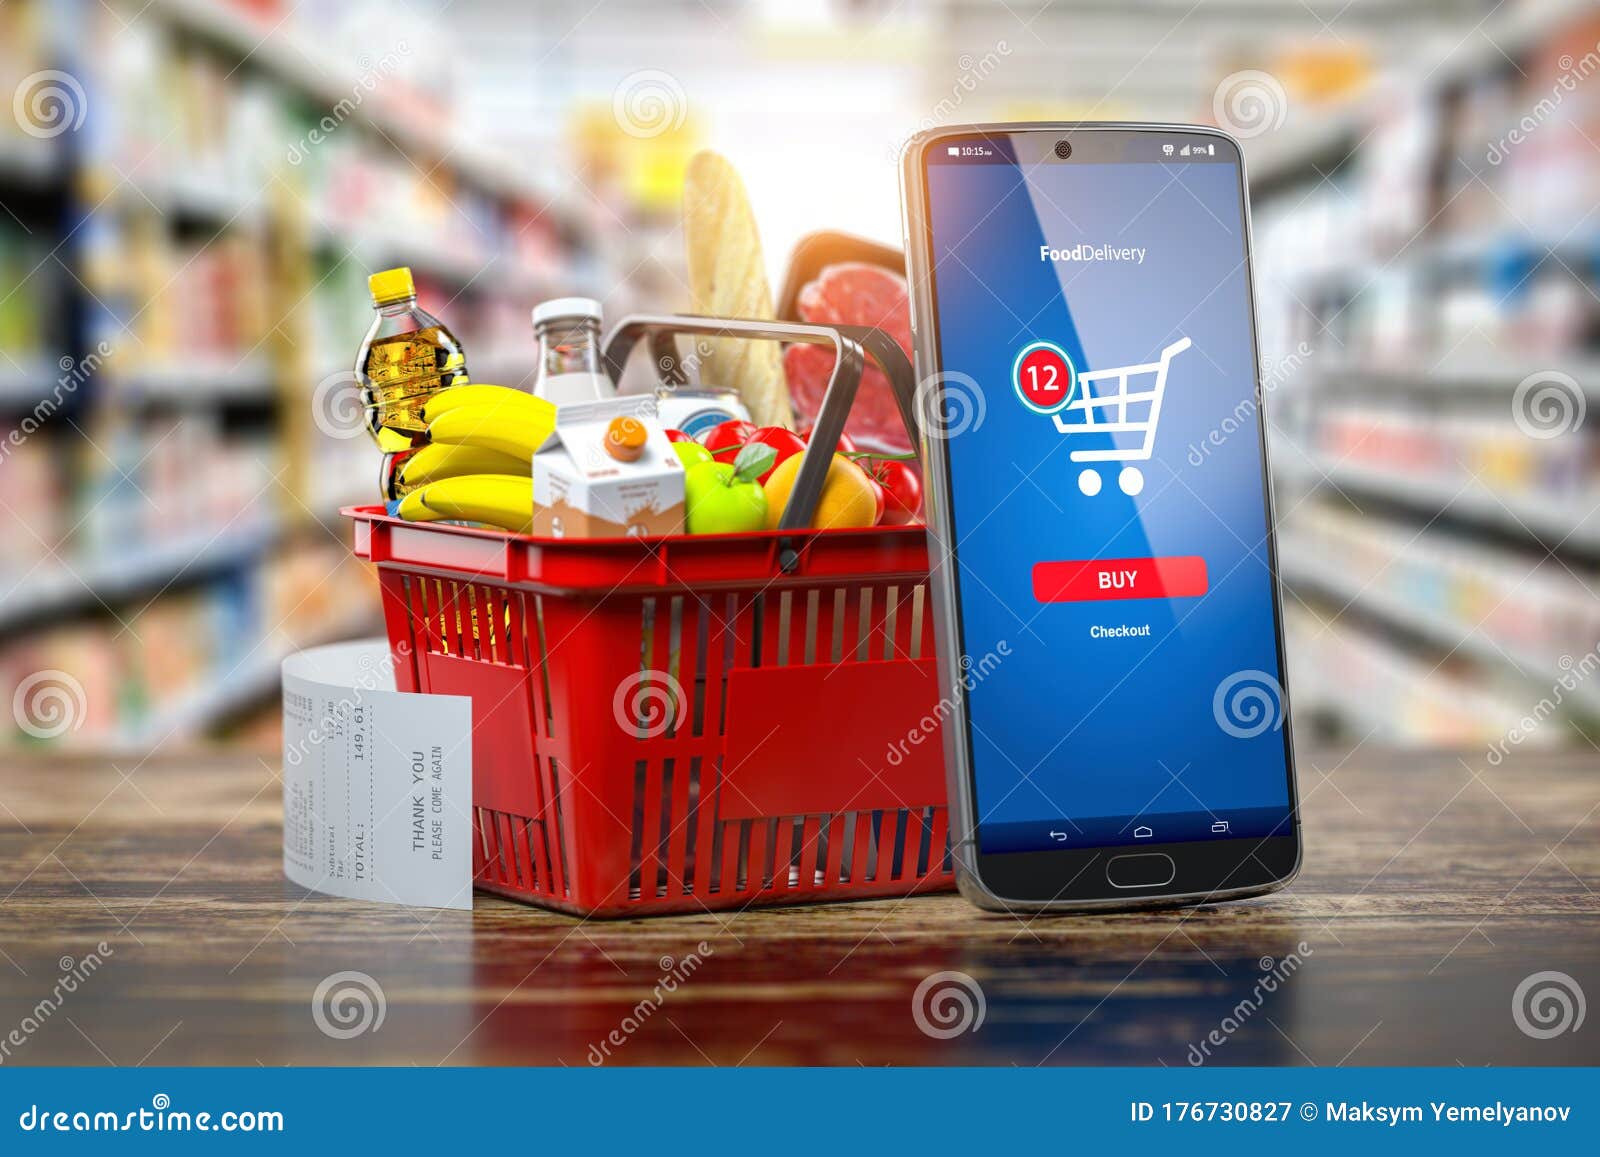 shopping basket with fresh food and smartphone. grocery supermarket, food and eats online buying and delivery concept